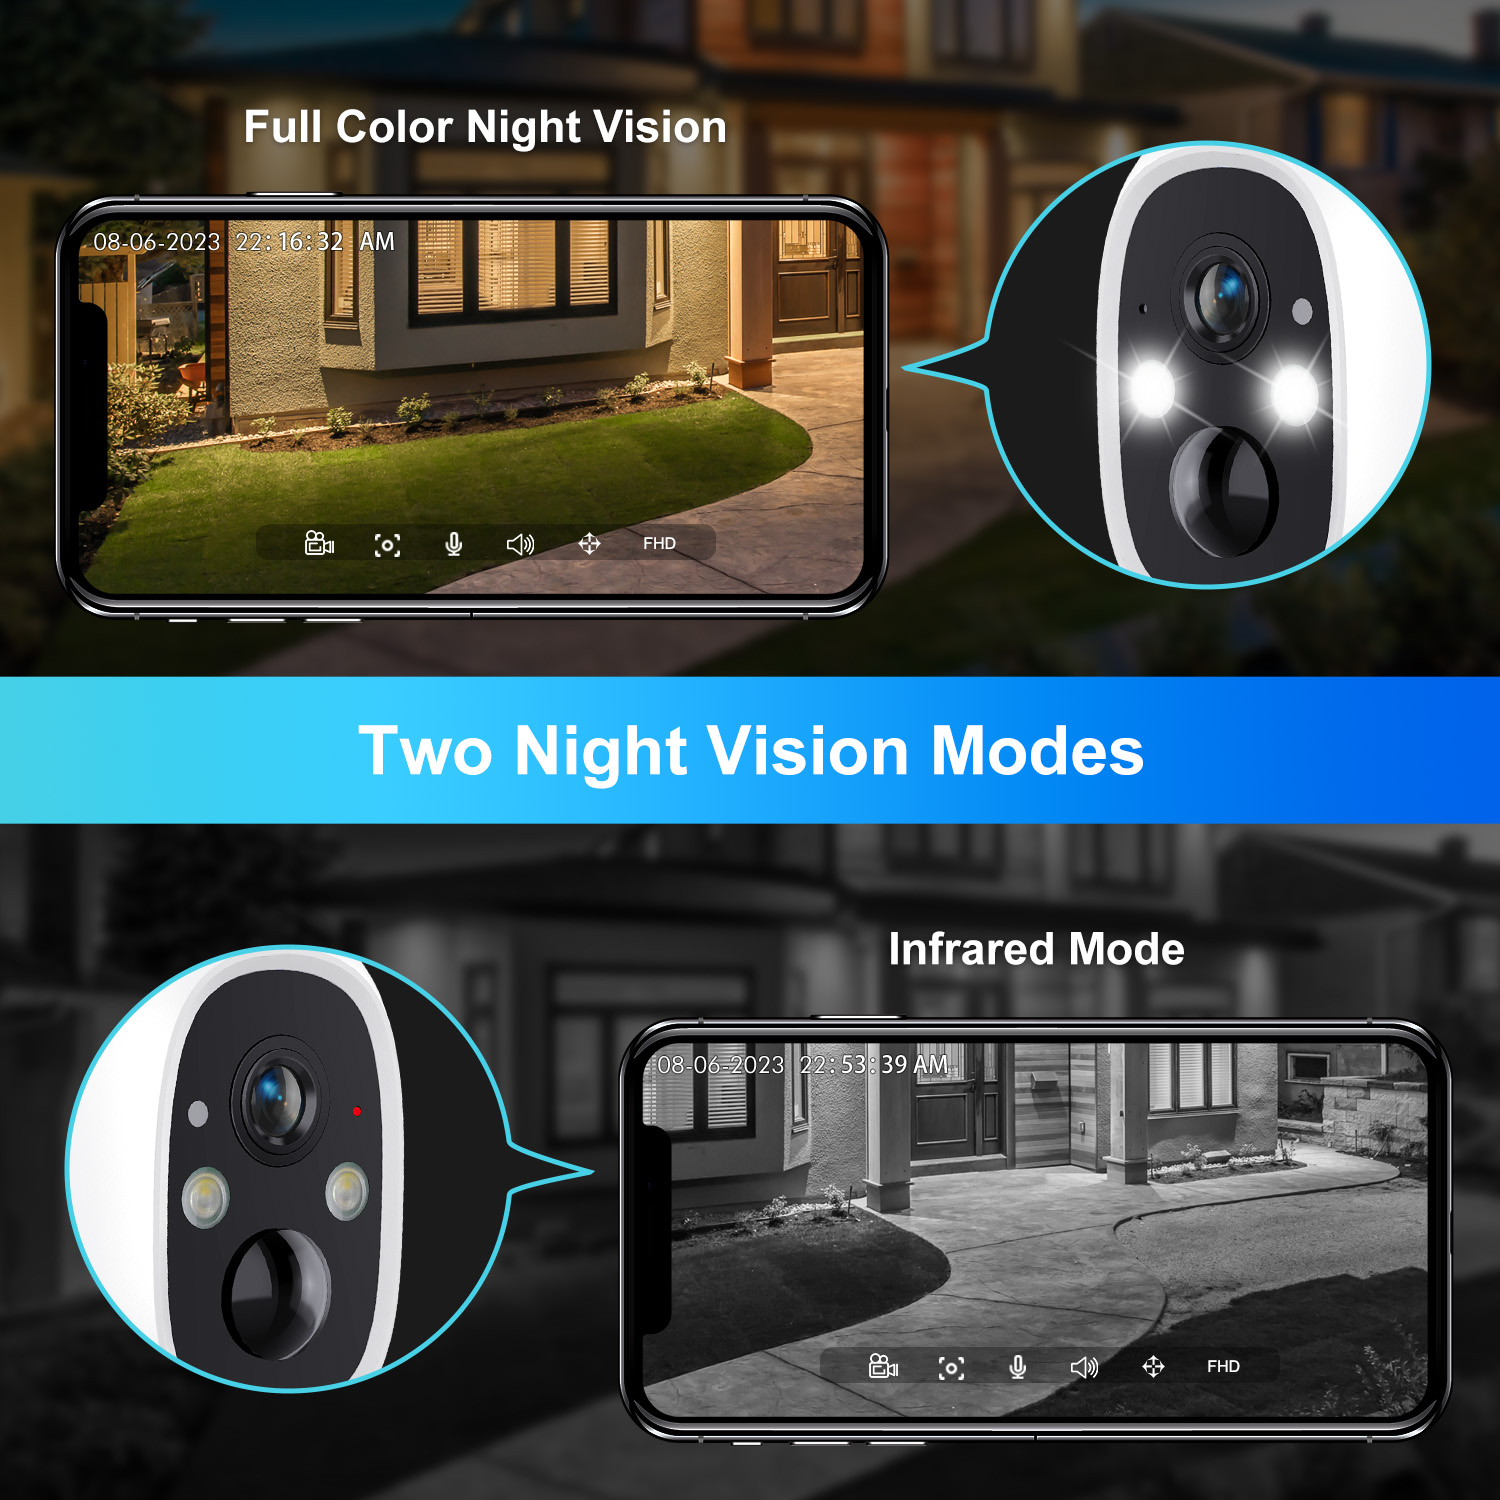 TOPVISION Wireless Security Camera, 2K WiFi Camera with Outdoor Night Vision, IP66 Outdoor Waterproof Camera for Home Security System, Surveillance Camera with PIR Motion Sensor, 2 Way Audio - image 3 of 9